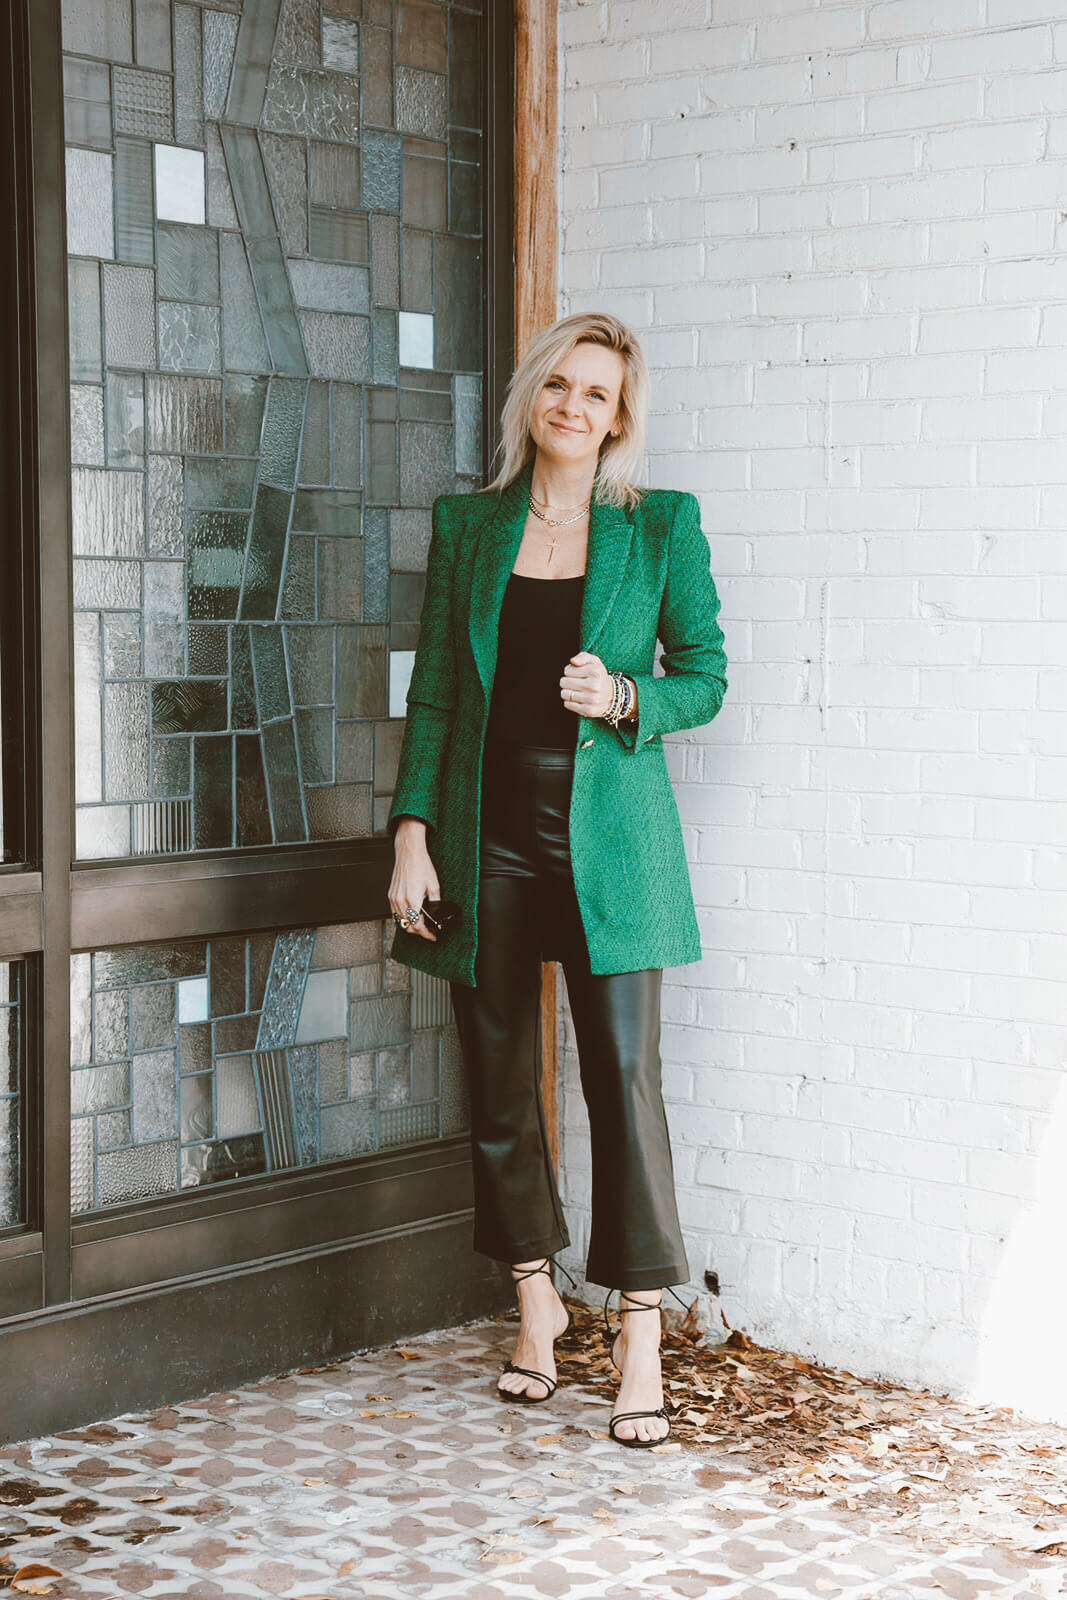 The Best Holiday Pieces At Zara green long structured blazer how to wear a green blazer this holiday season how to style a blazer over all black how to wear a blazer for a Christmas party nashville stylists share their favorite holiday attire personal stylists talk holiday attire